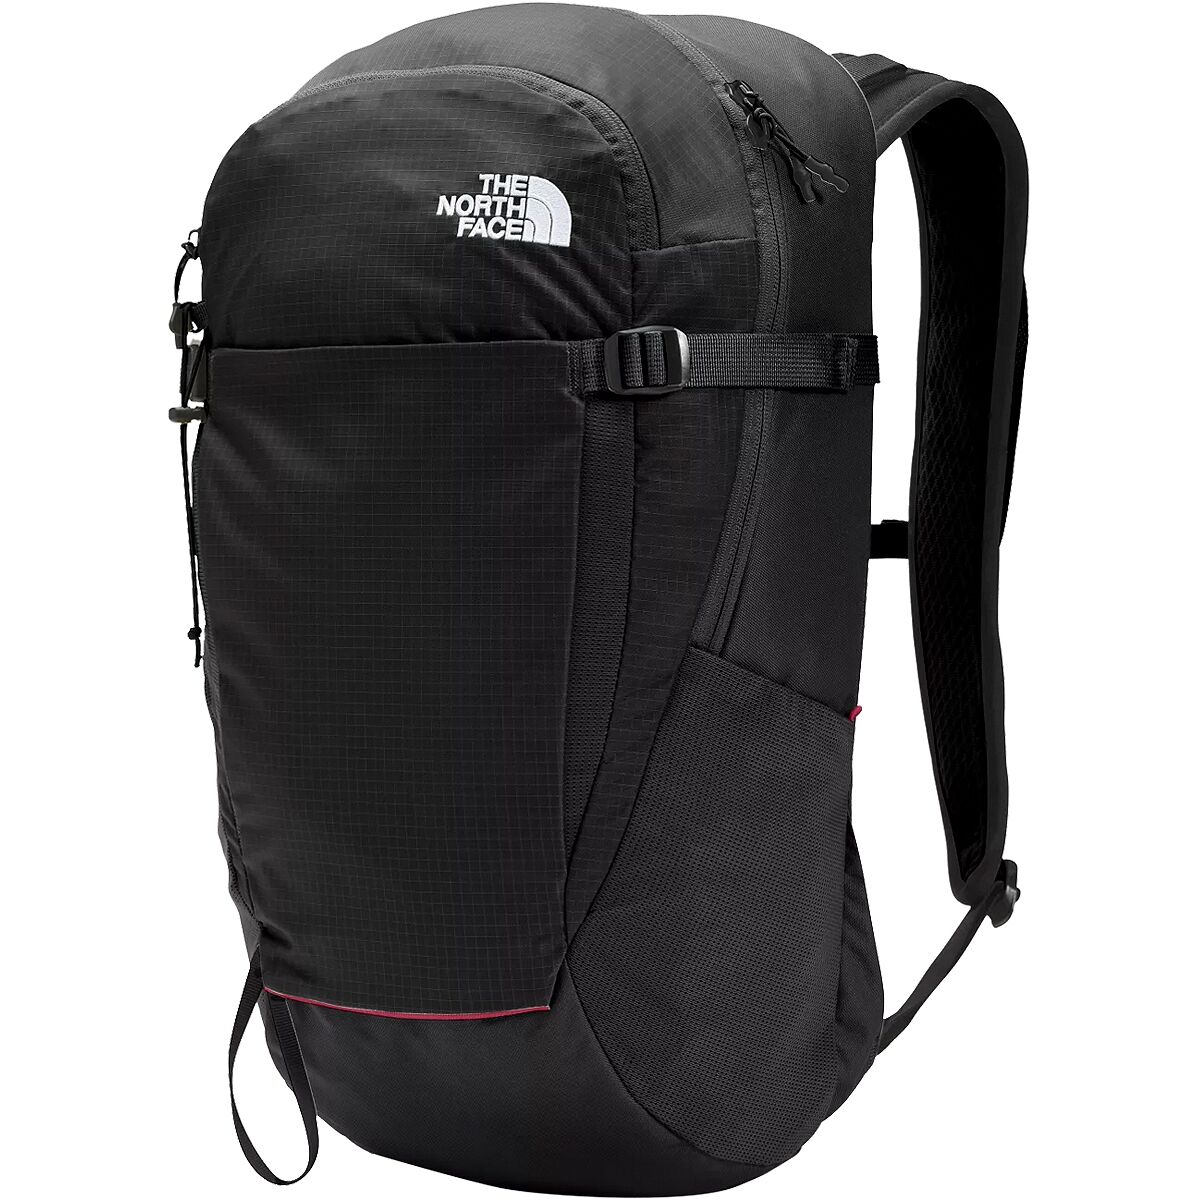 The North Face Basin 24L Backpack | Backcountry.com